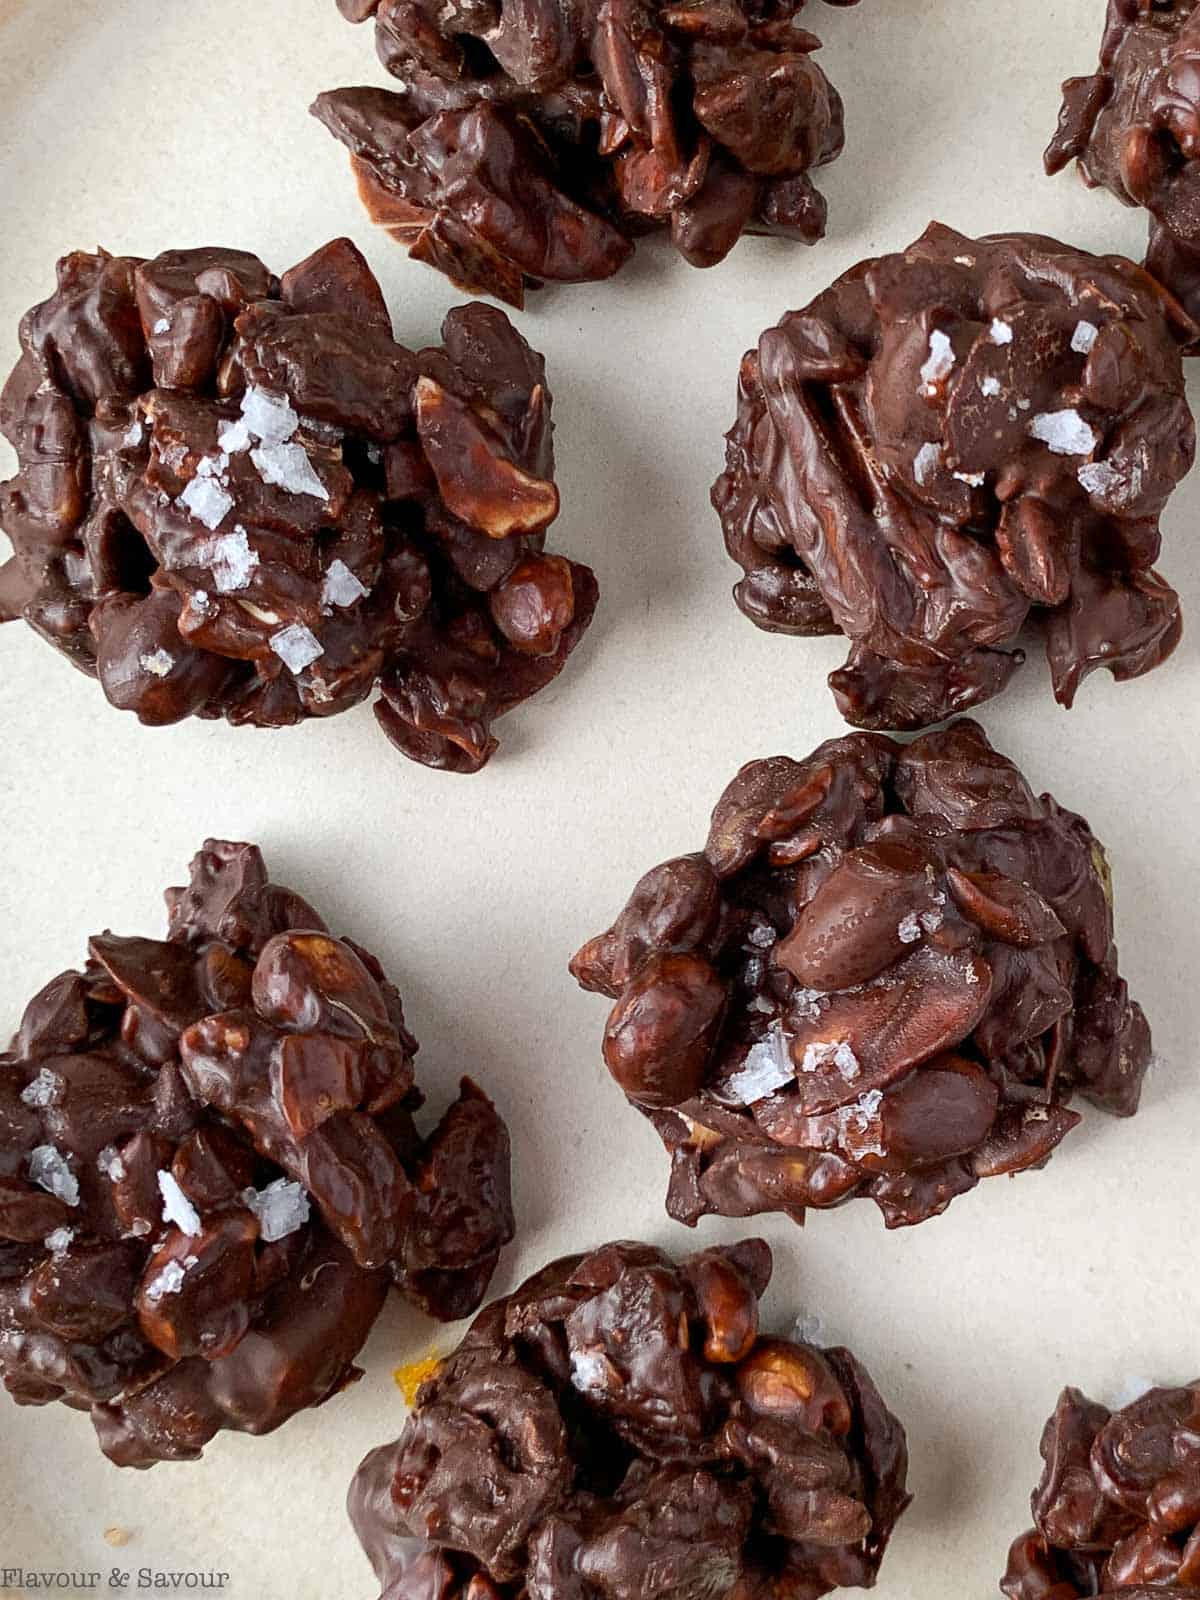 Trail Mix Chocolate Nut Clusters with Sea Salt - Flavour and Savour